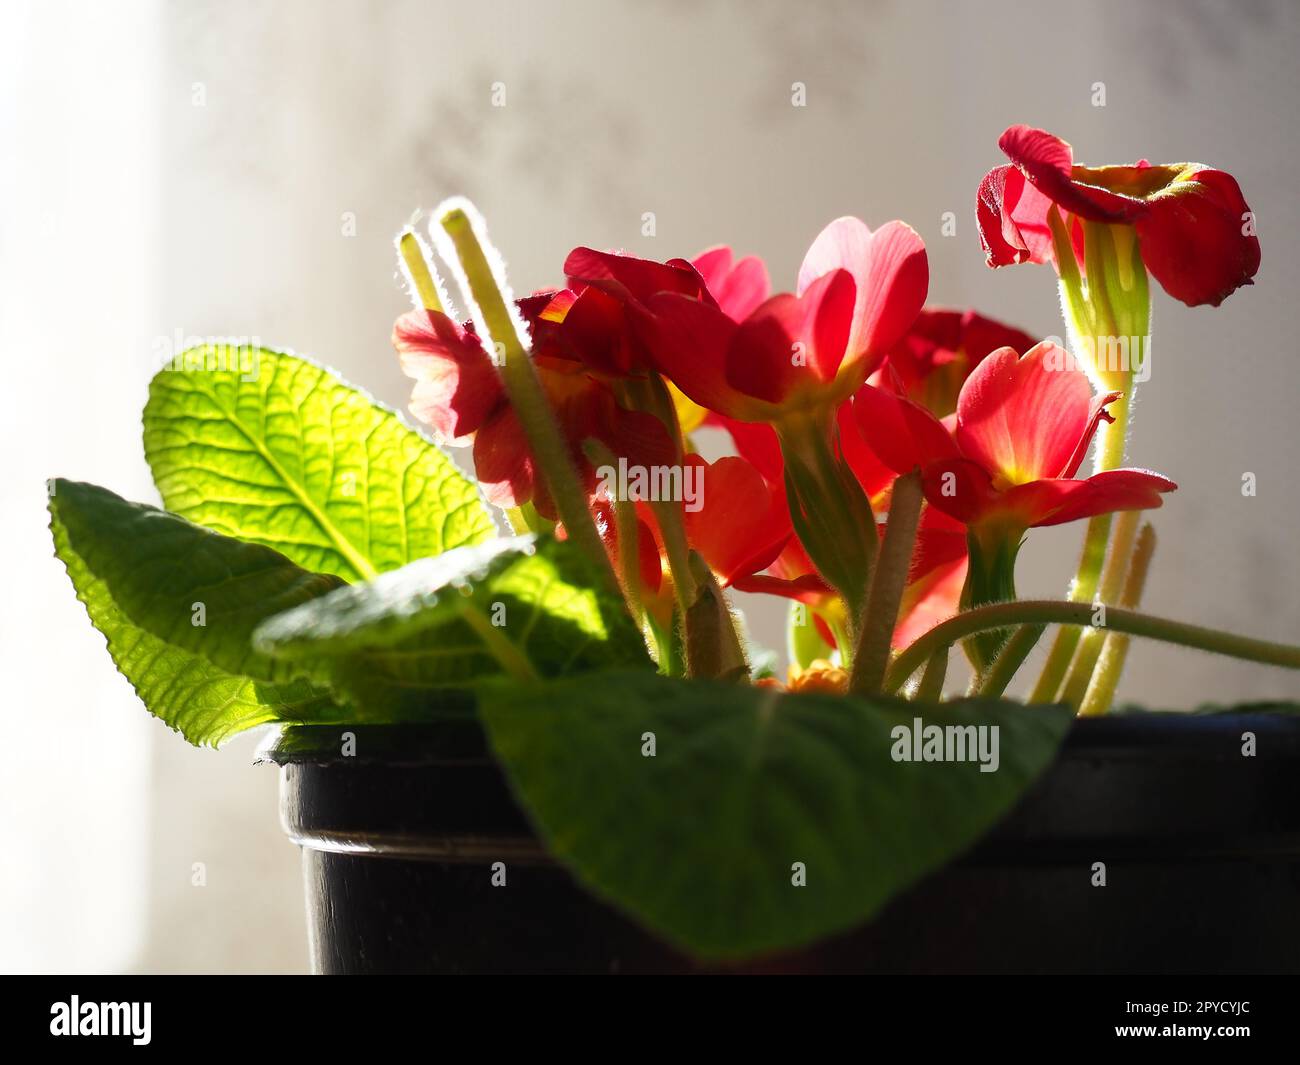 Primula, a genus of plants from the Primulaceae family of the Ericales order. Indoor floriculture as a hobby. Red bright flower with a yellow center. Lateral plan in the counterlight from the window. Stock Photo